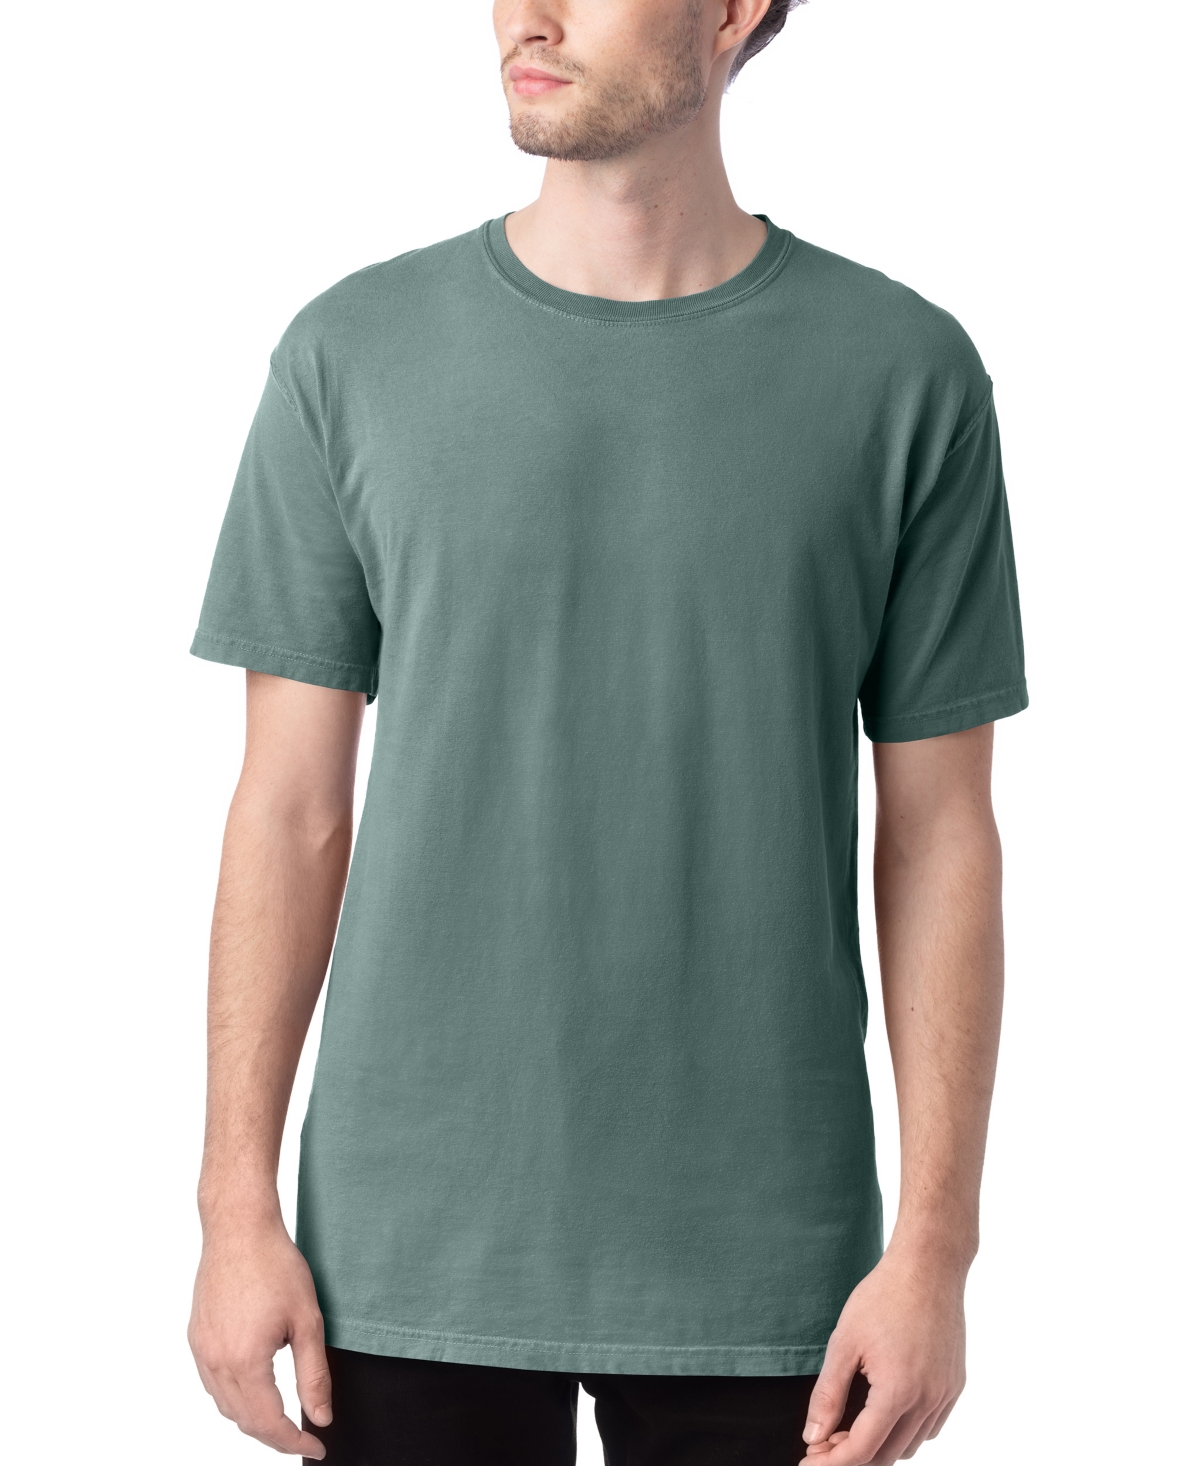 Hanes Unisex Garment Dyed Cotton T-shirt In Green